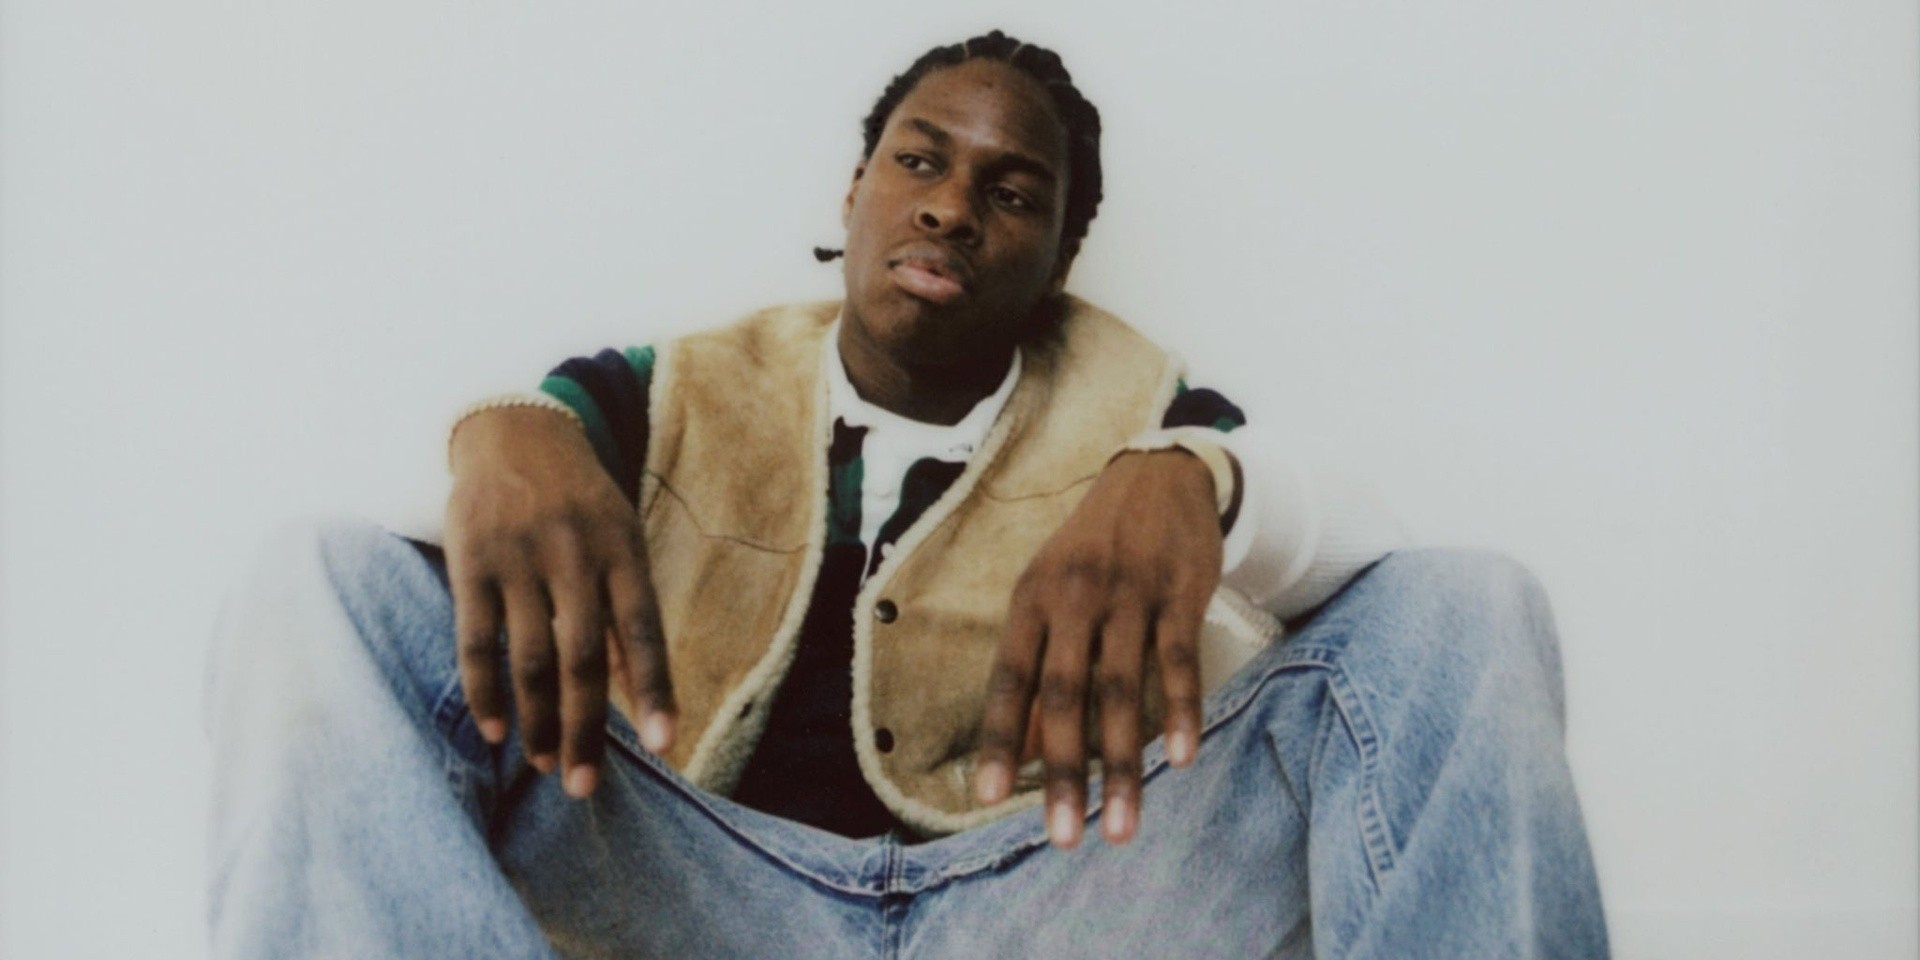 Daniel Caesar is coming to Manila this July